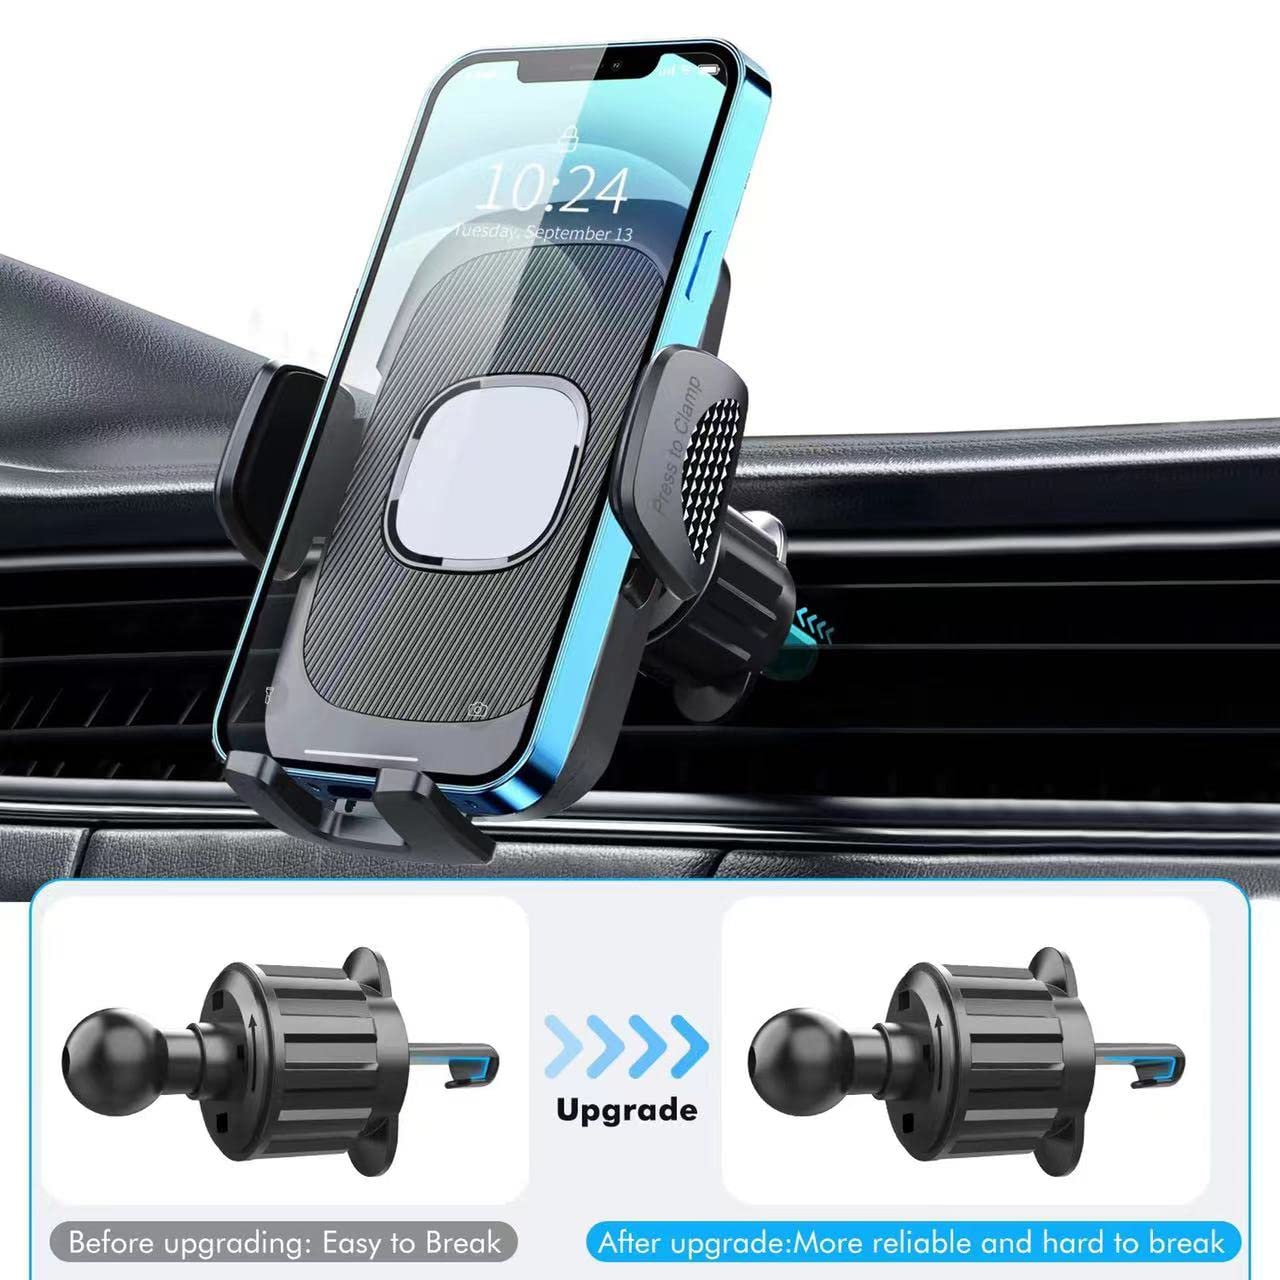 Phone Mount for Car, Car Phone Holder Mount Clip Mount Phone Holder, Car Vent Phone Mount for Car Cellphone Stand Air Vent for Smartphone, iPhone, Automobile Cradles Universal【Metal Hook】